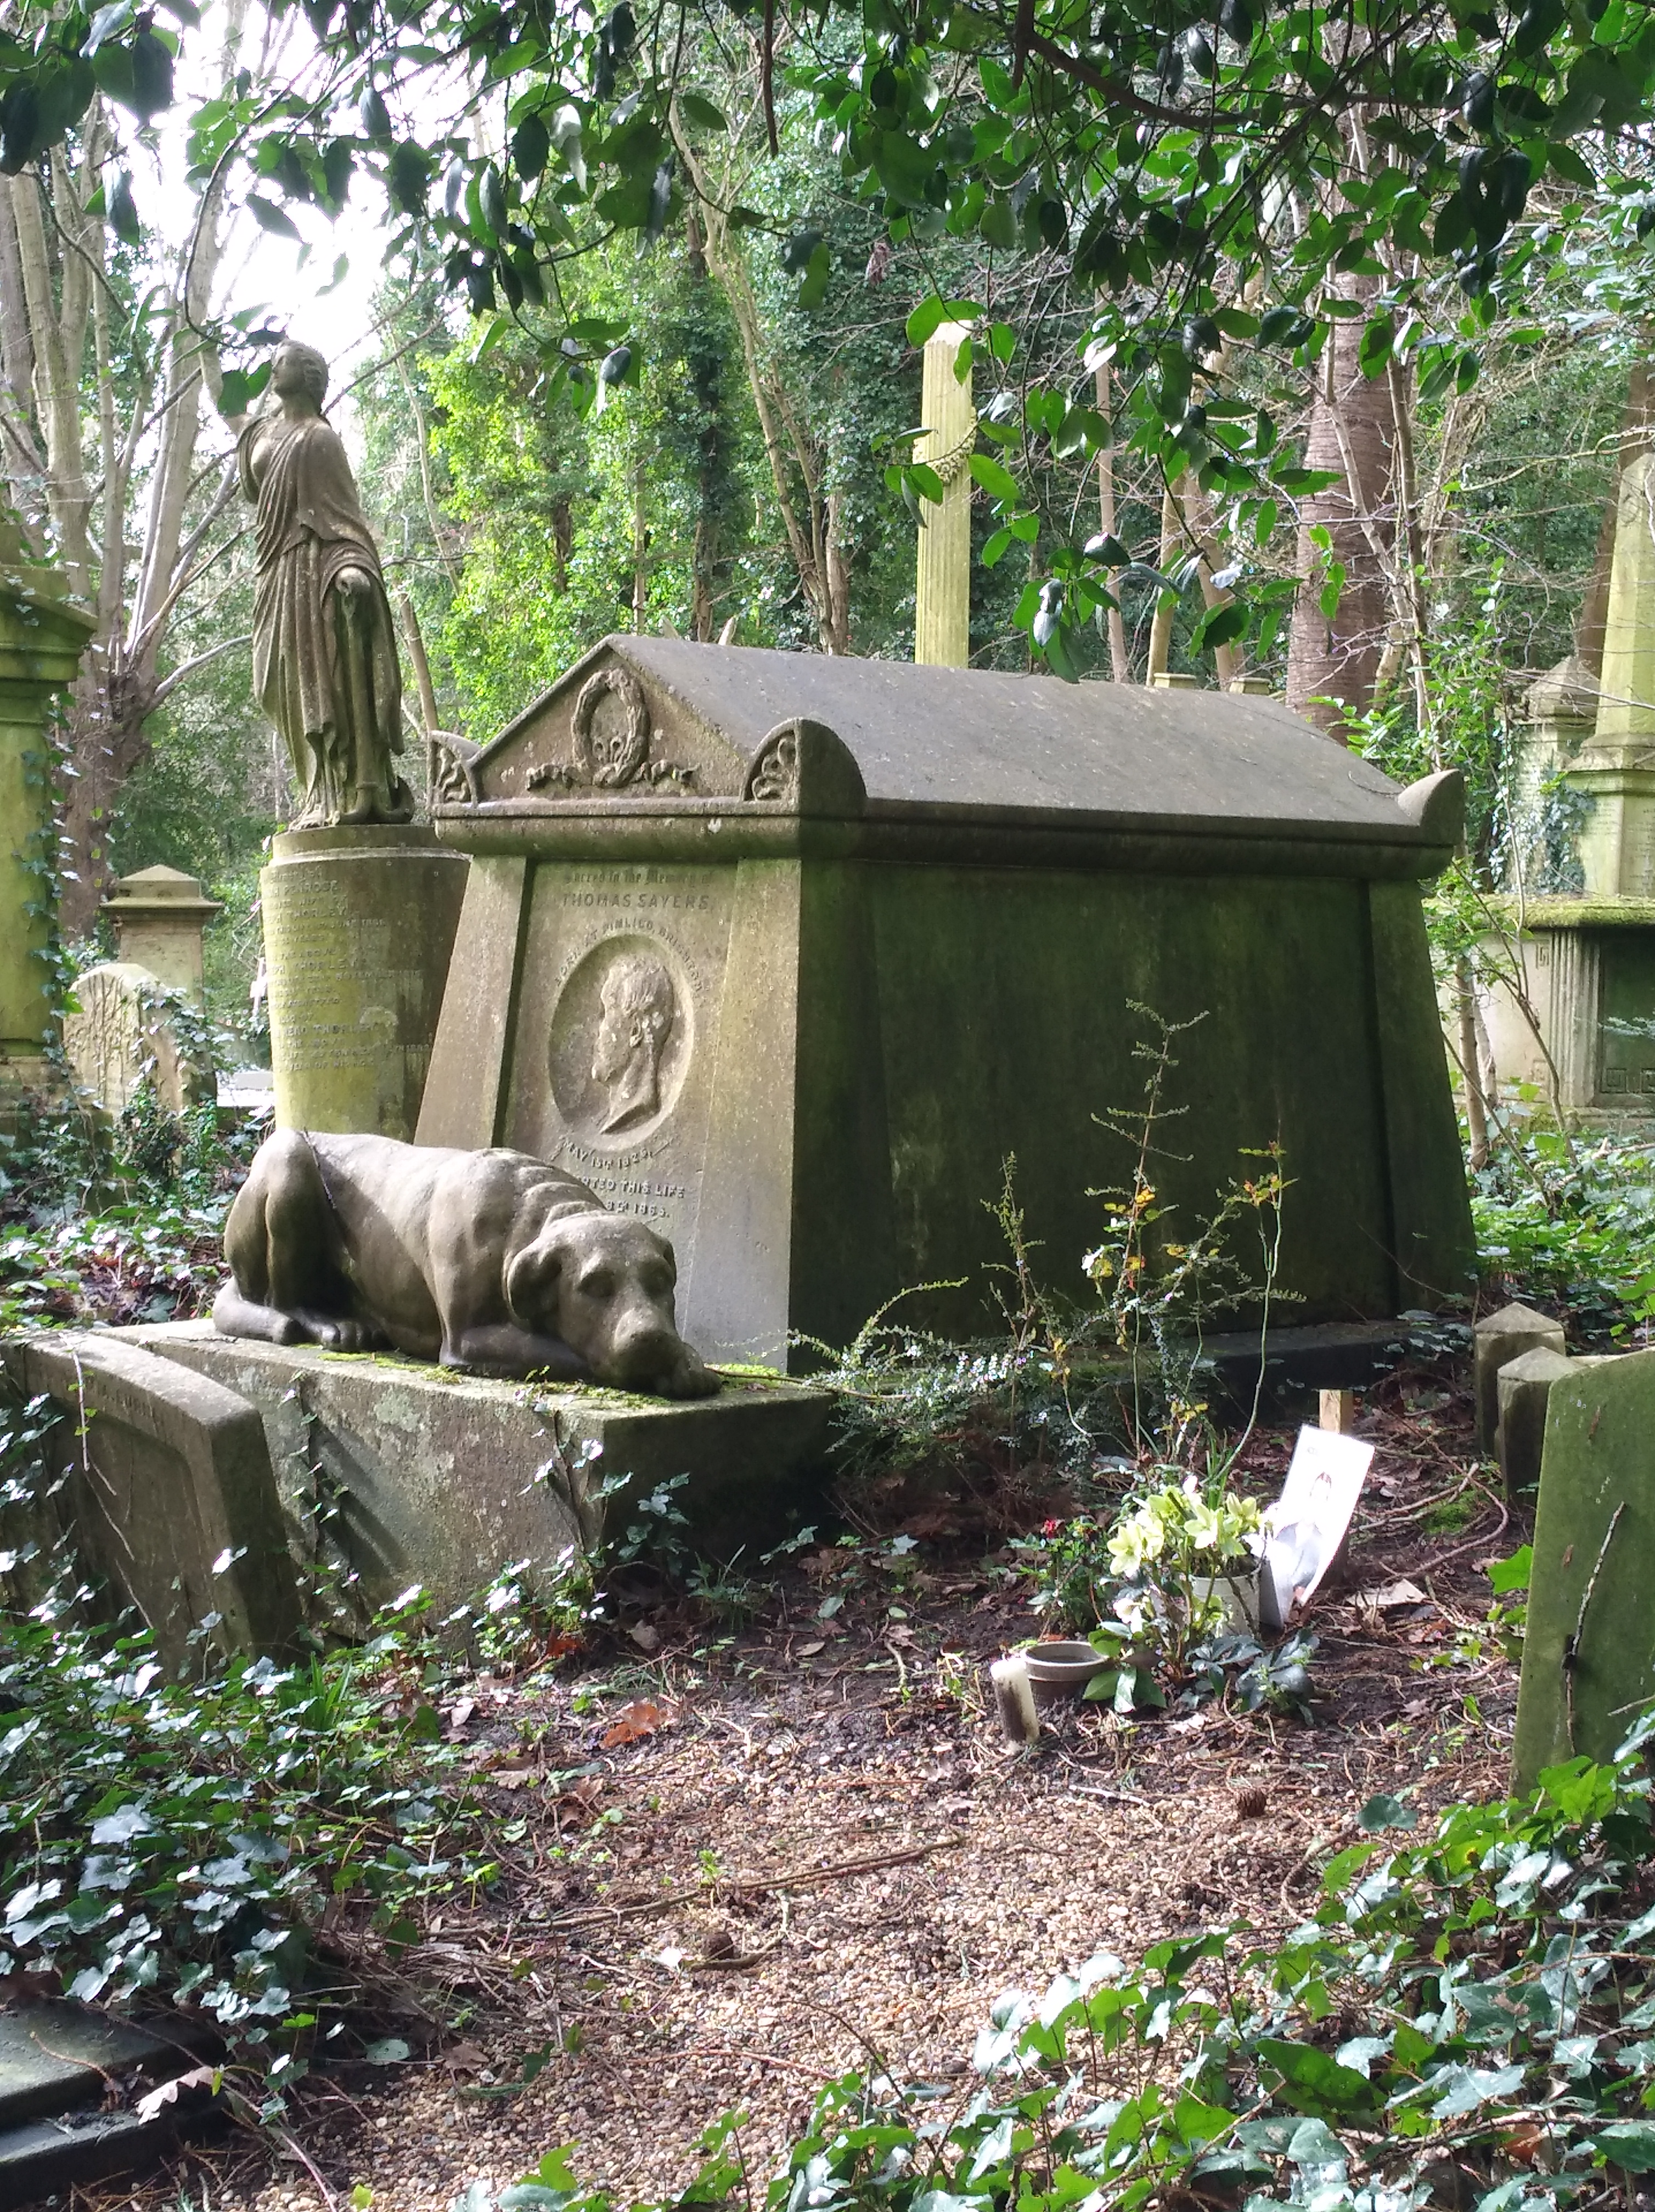 Tomb of Tom Sayers, Highgate Cemetery